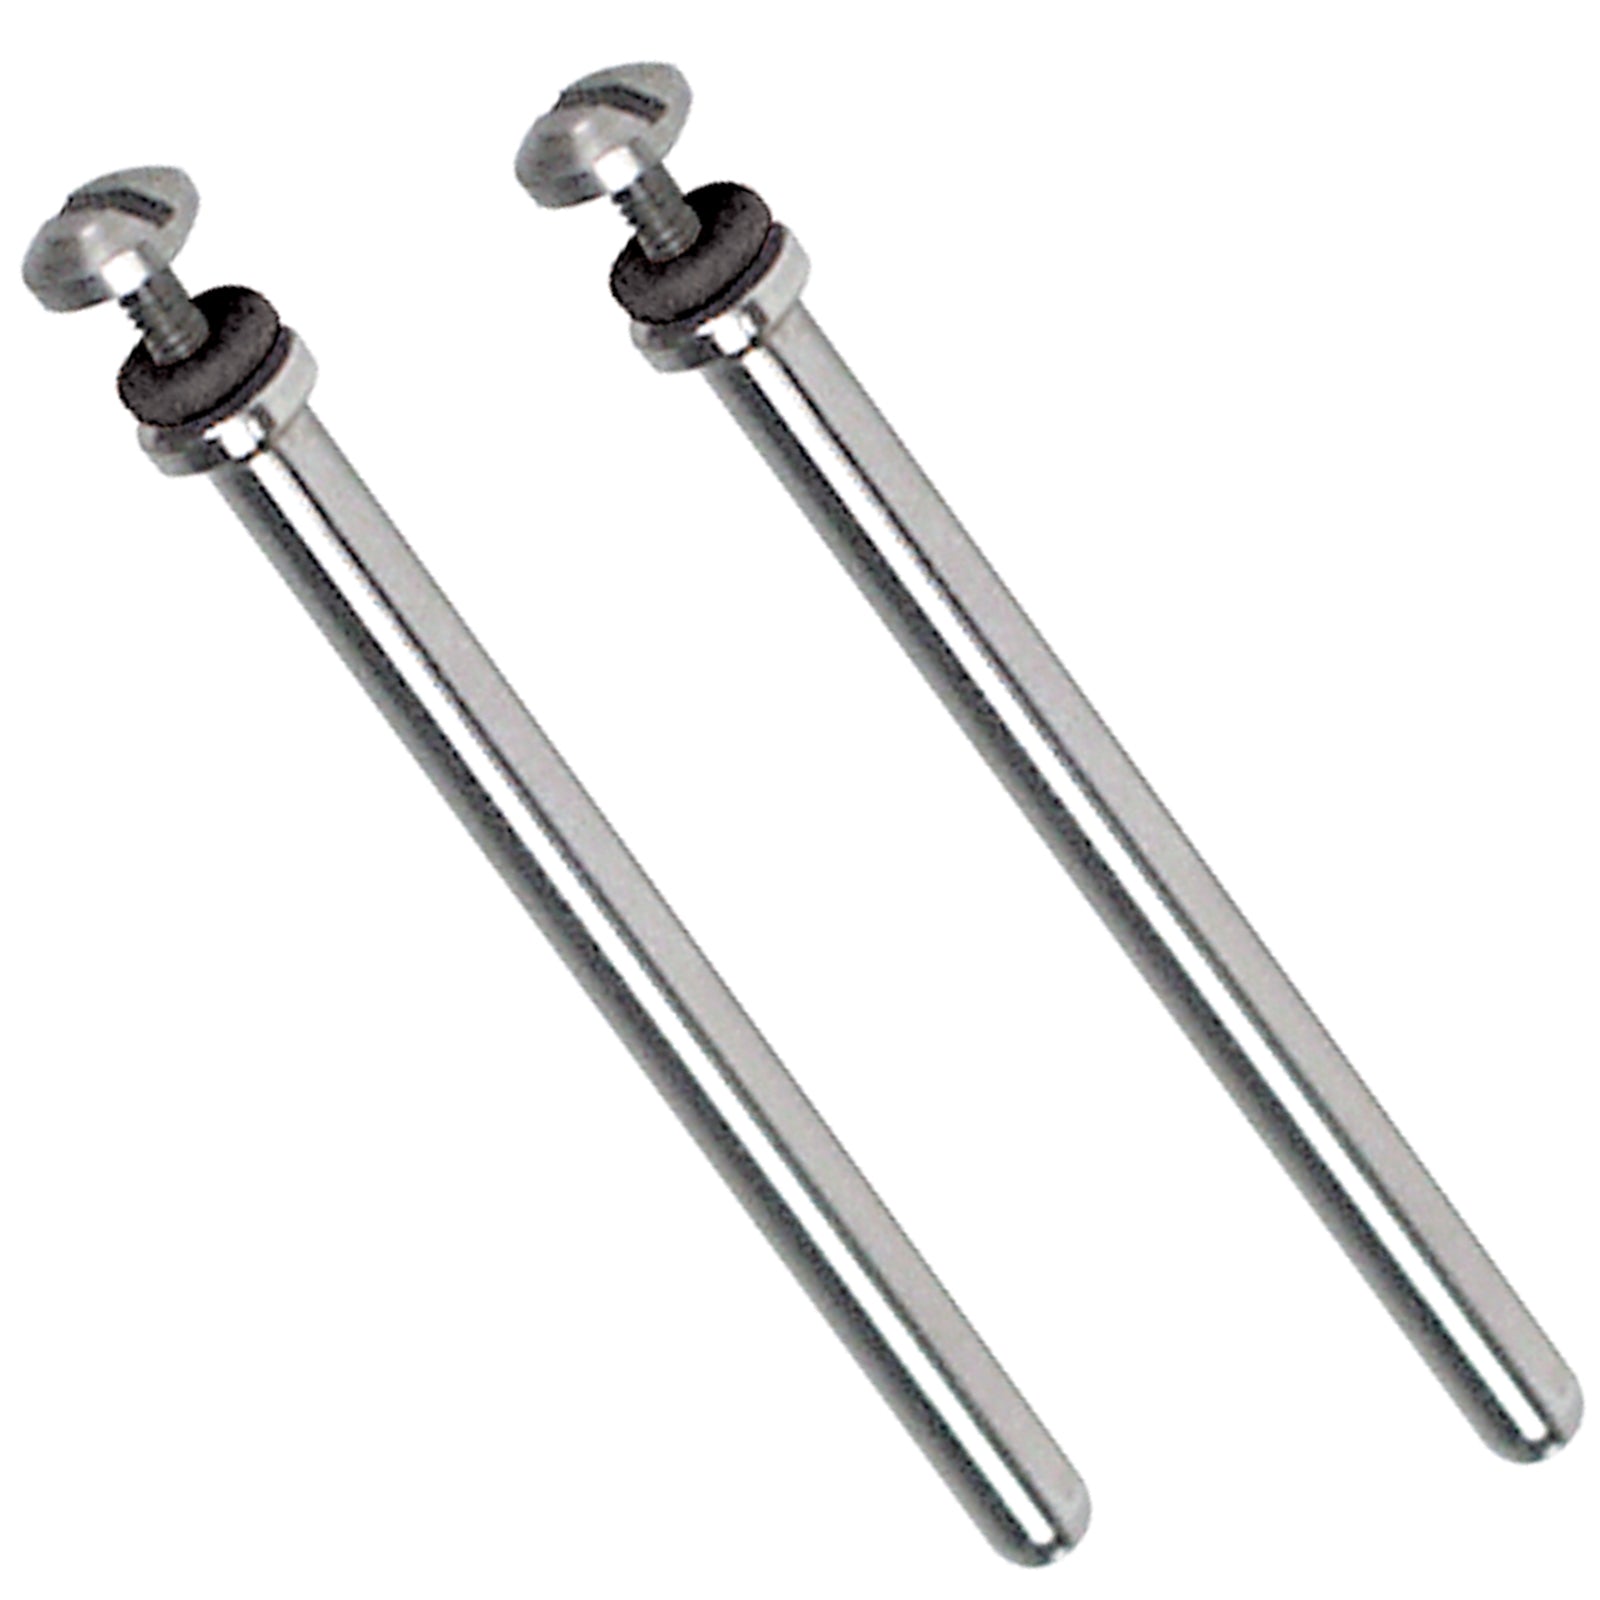 Cut - off / Buffing Wheel Mandrel, 1/8 Inch Shank, Set of 2 - Micro - Mark Rotary Tool Accessories